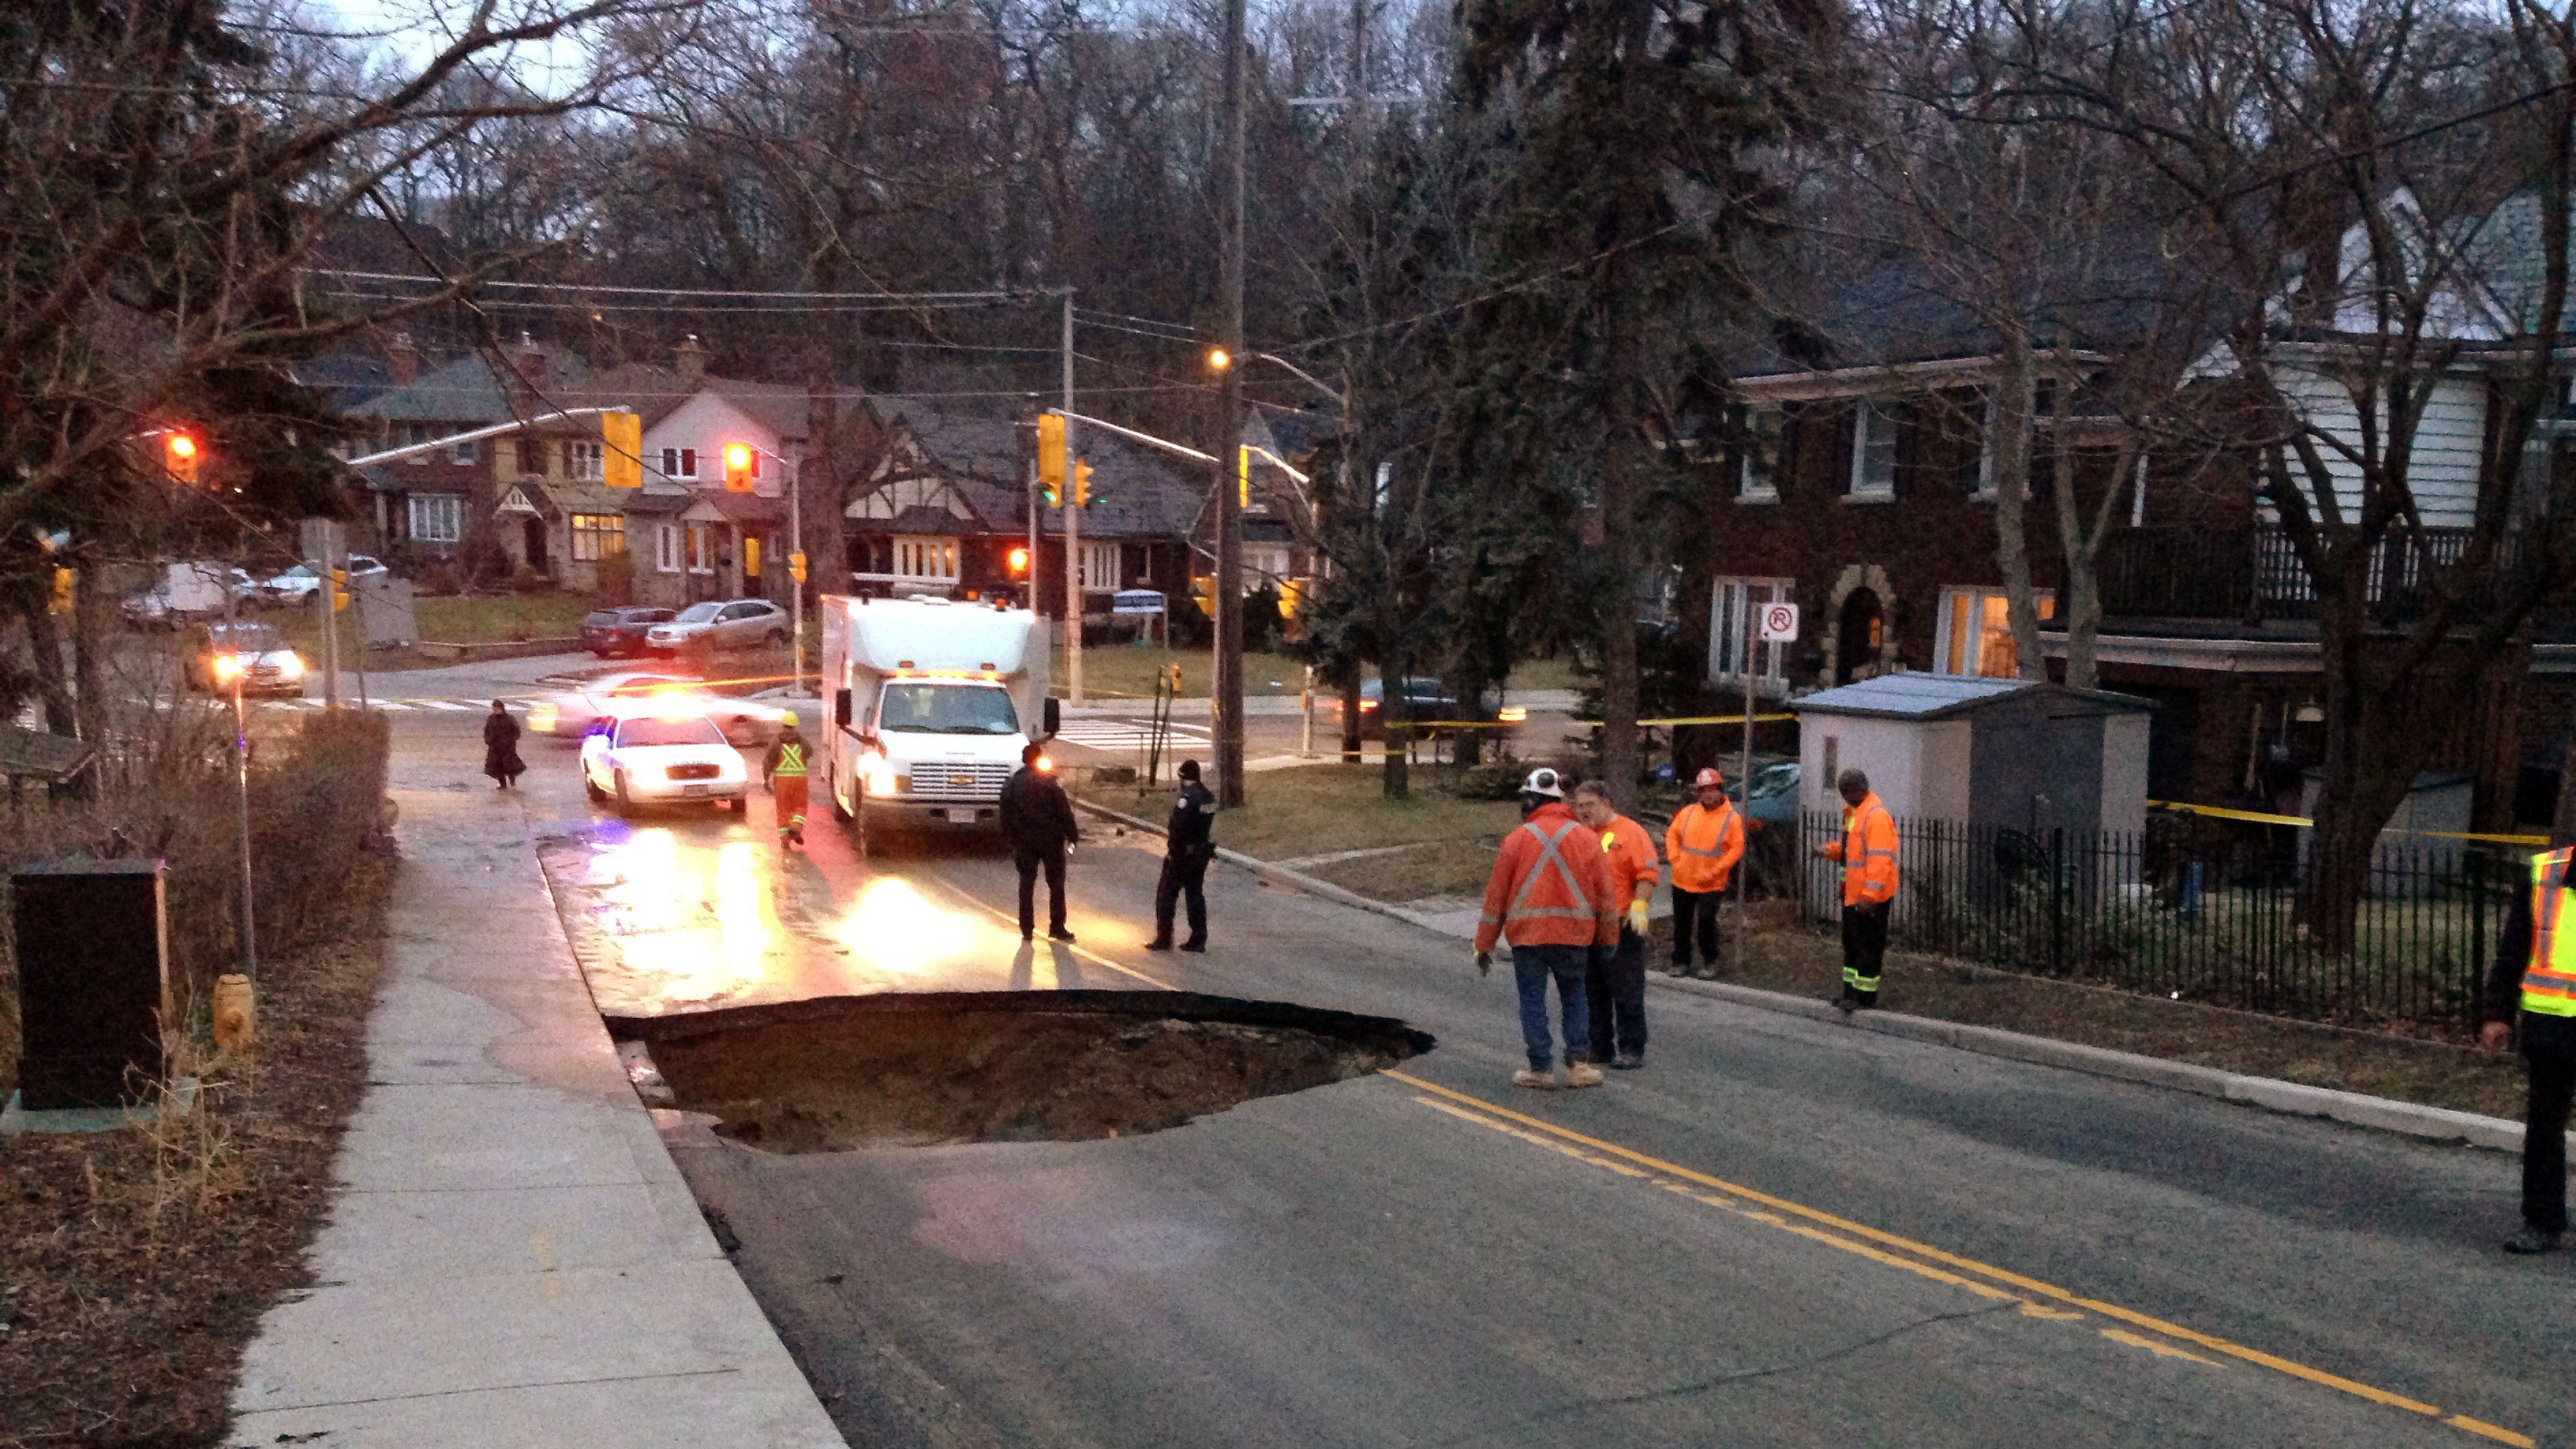 20-foot sinkhole closes street in Toronto's west end - CityNews